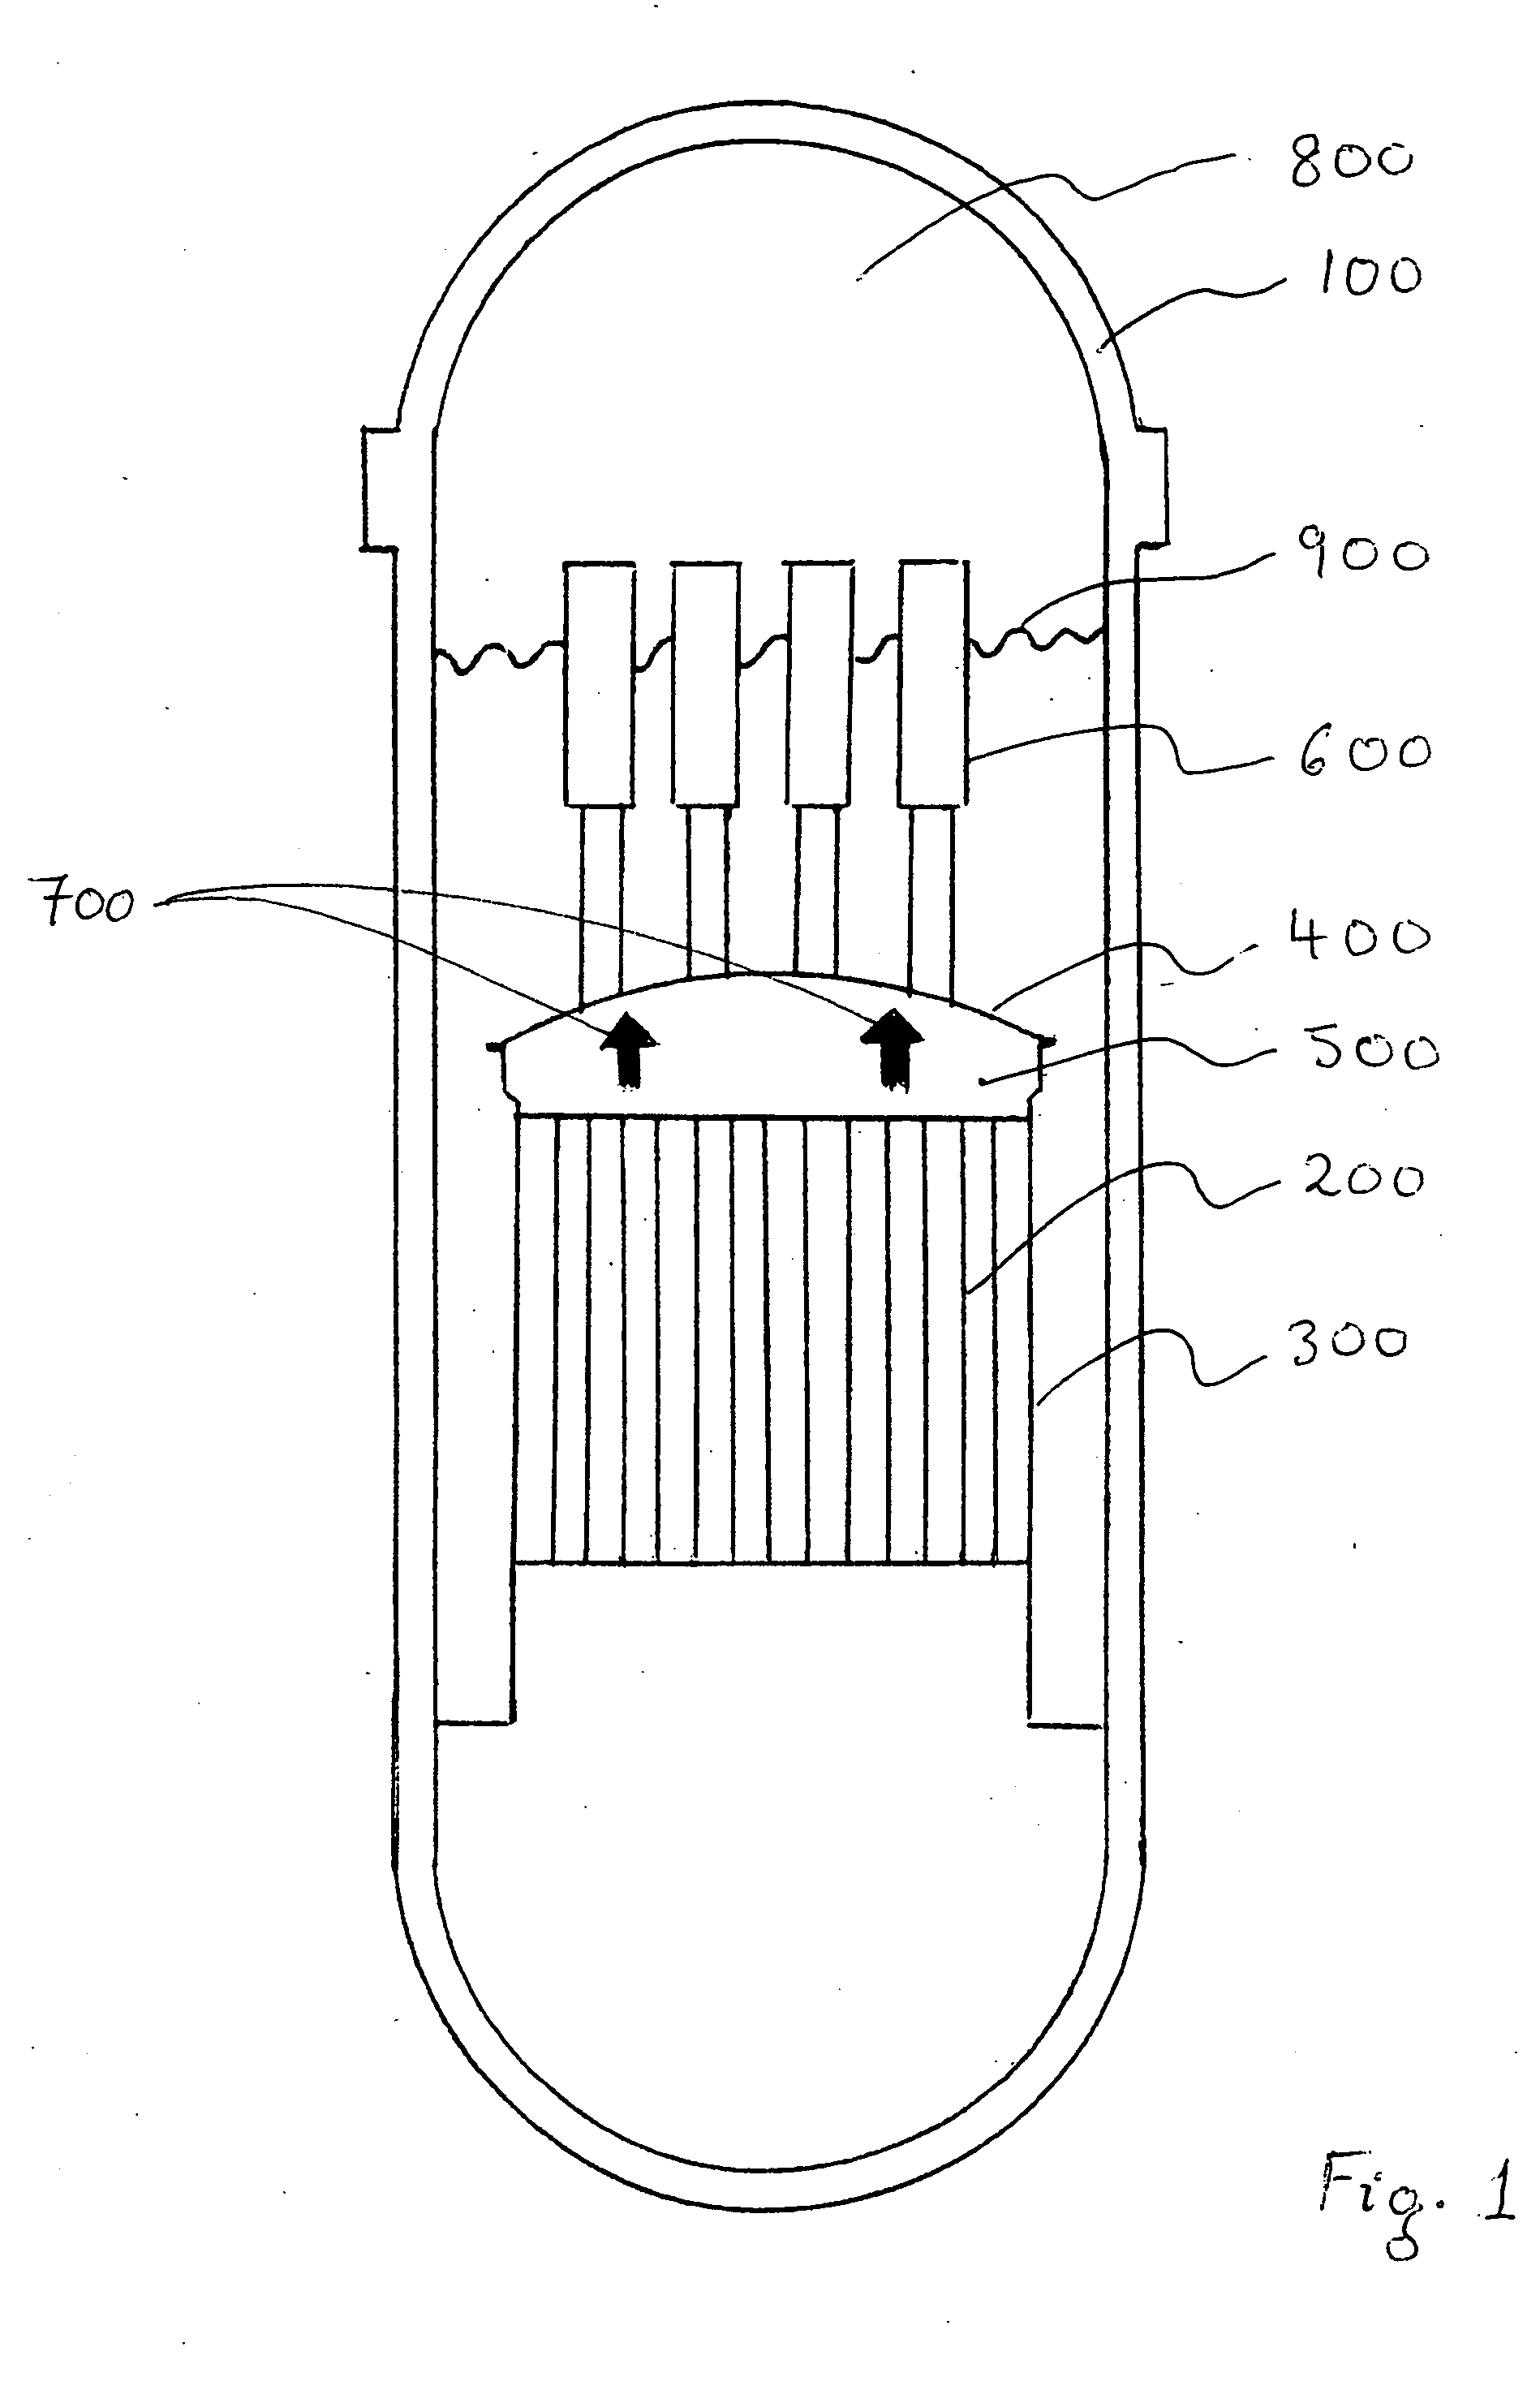 Method and device to stabilize boiling water reactors against regional mode oscillations